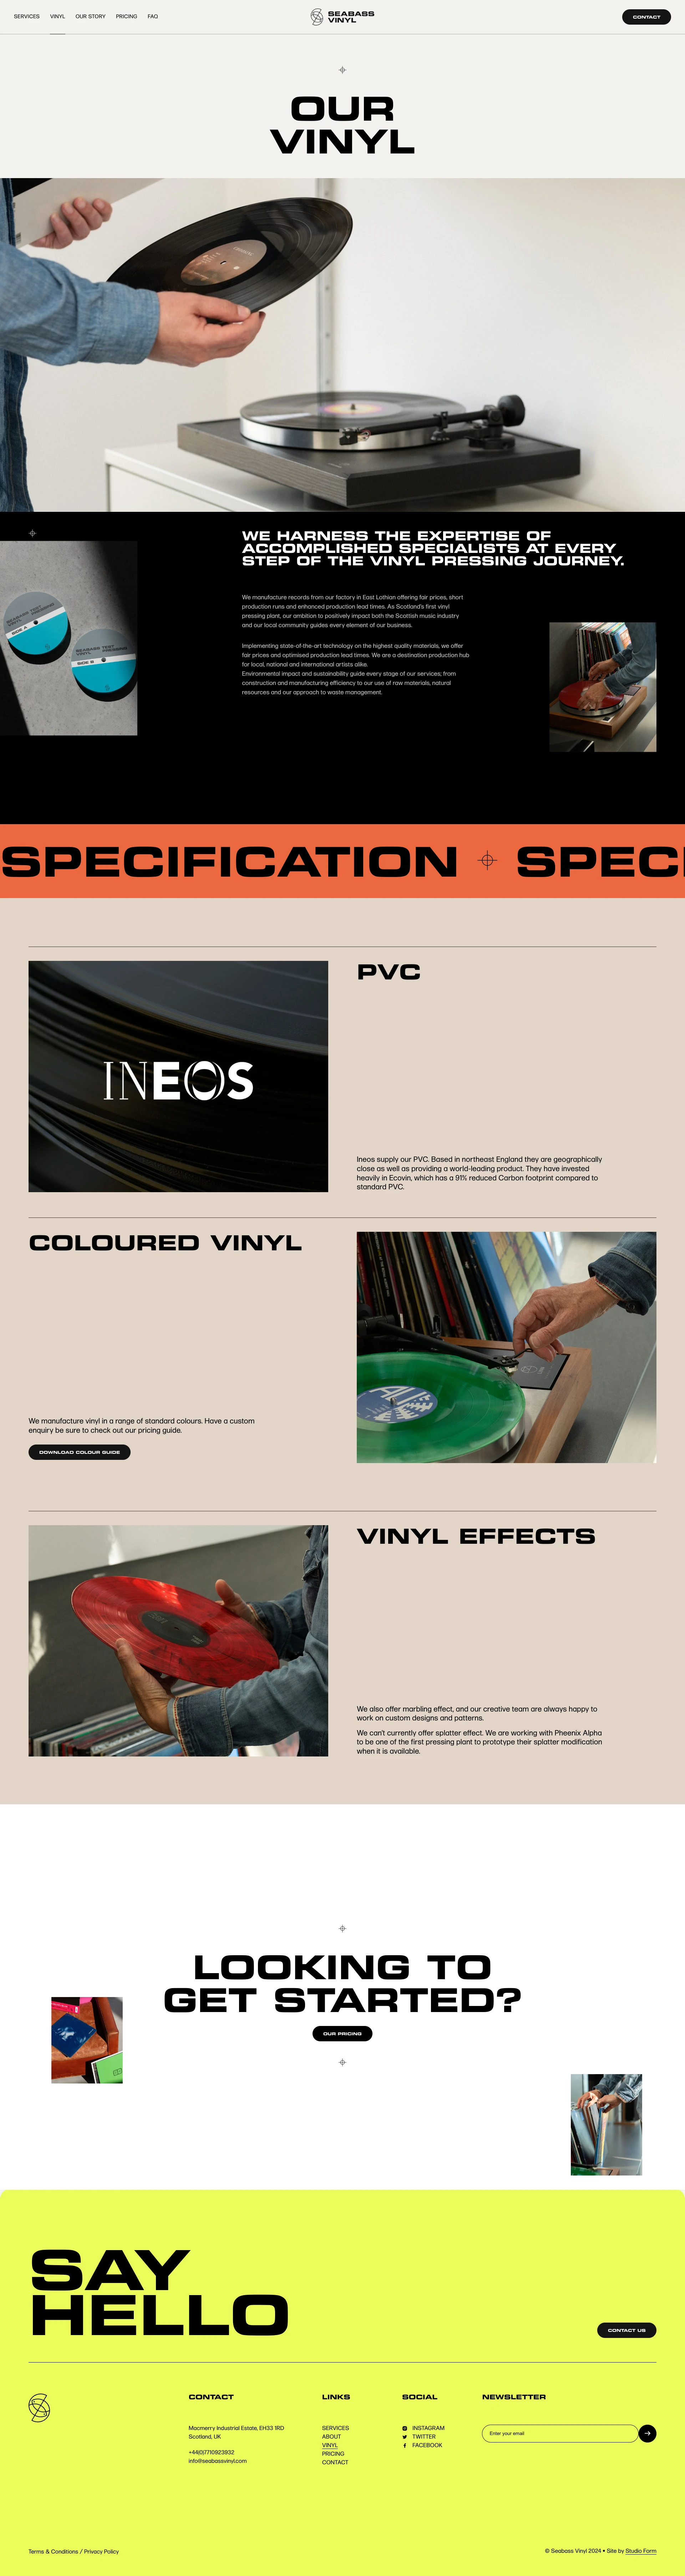 Seabass Vinyl Landing Page Example: We are a full service Low Lead time, Vinyl Record Pressing Plant, State-of-the-art vinyl manufacturing, from Scotland with love. At Seabass Vinyl we create premium quality vinyl records through an authentic, optimised production that serves artists and listeners who share our passion for music. We’re an independent, family-owned business, producing industry-leading, premium quality records in our factory on the beautiful East Lothian coastline.